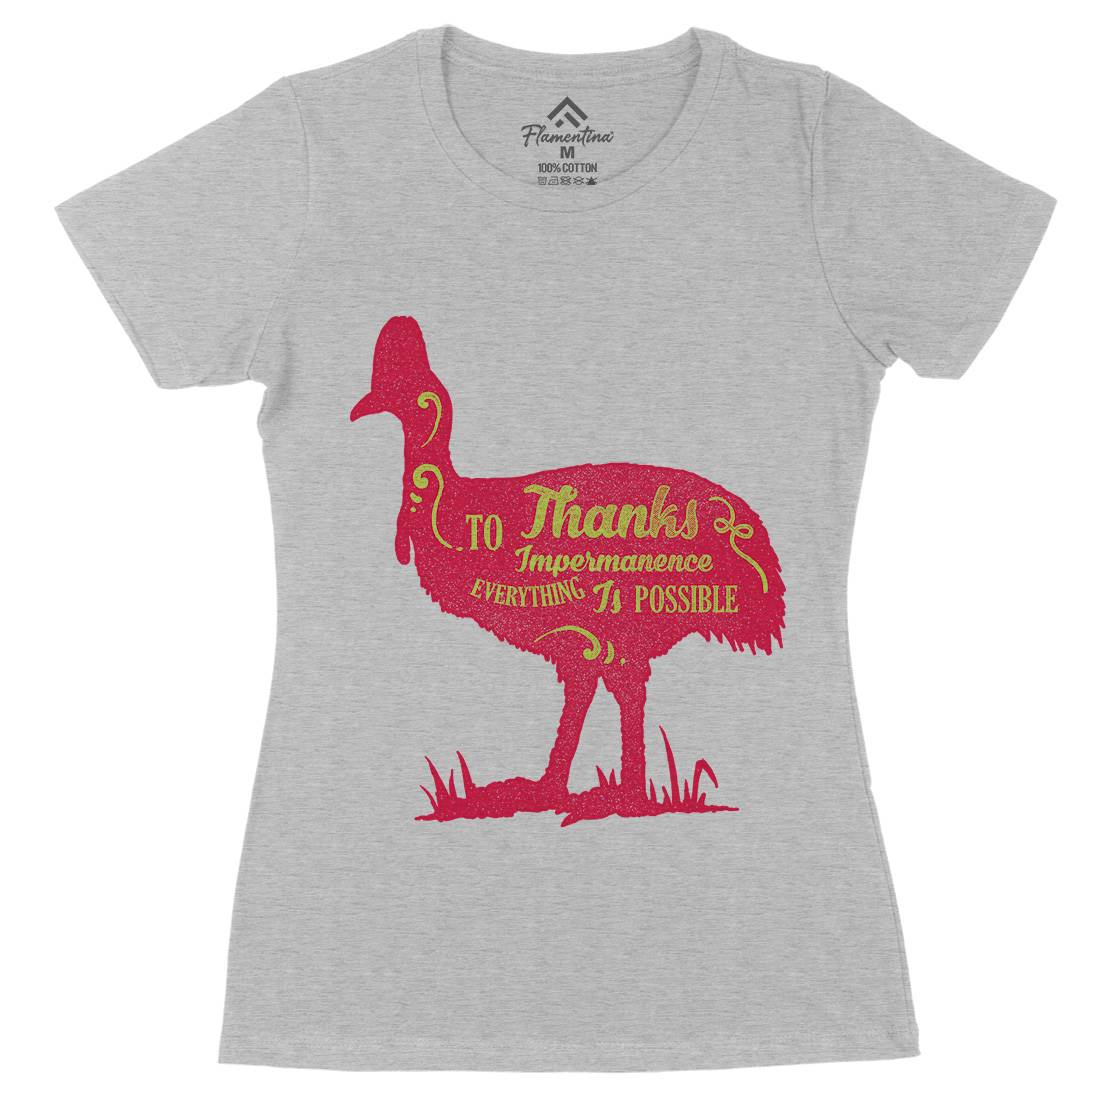 Thanks To Impermanence Womens Organic Crew Neck T-Shirt Quotes A374